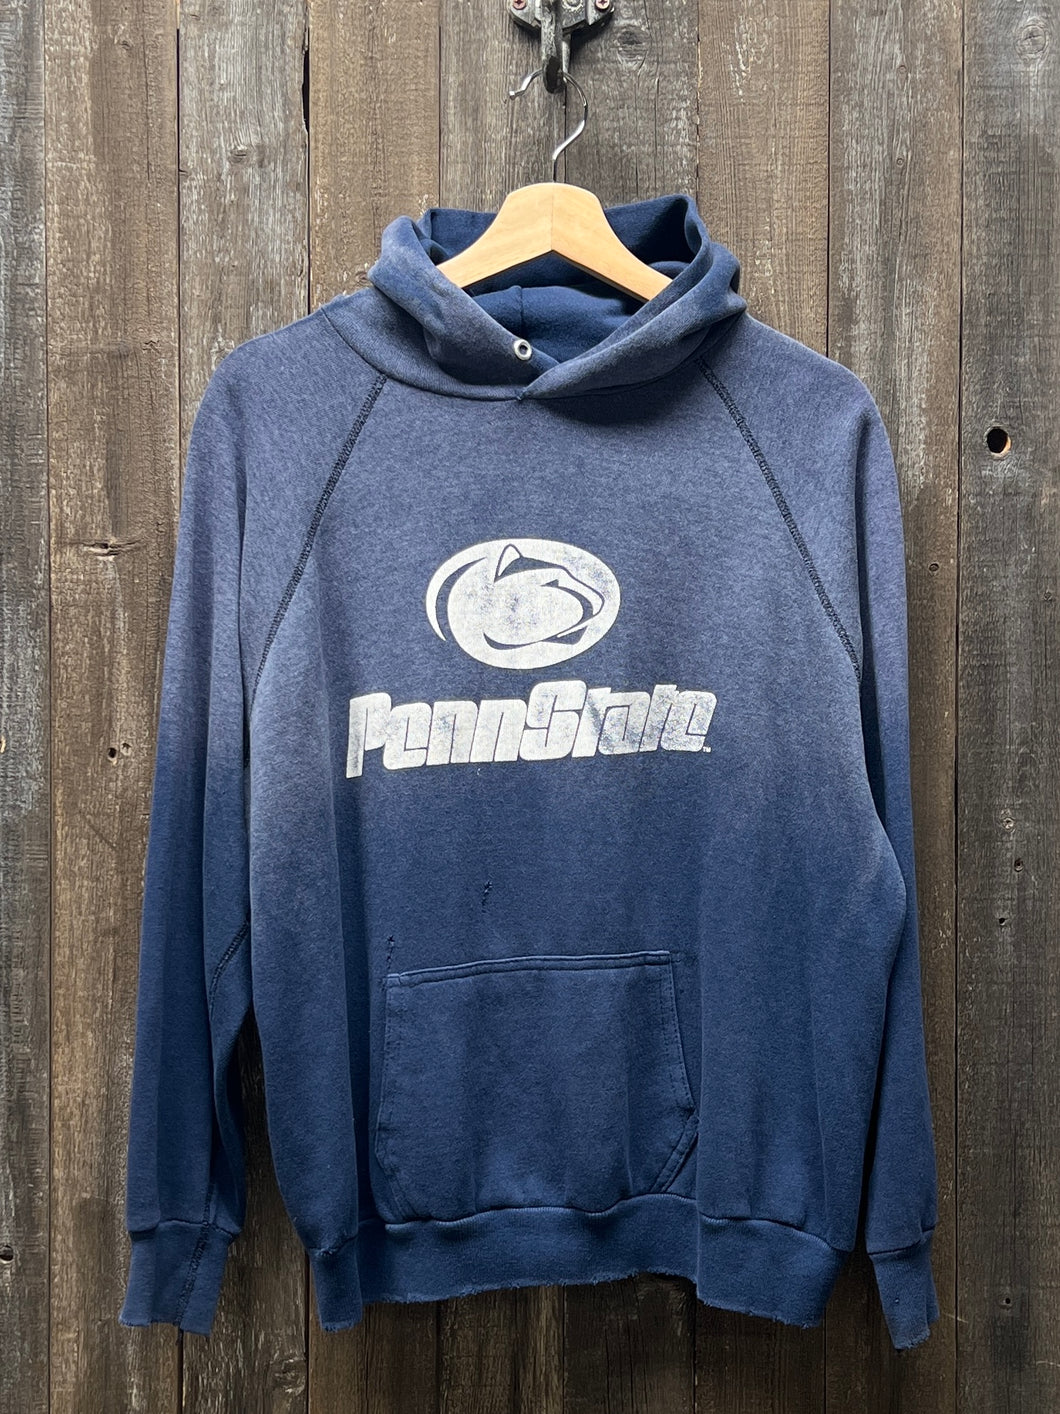 Penn State Sweatshirt -M/L-Customize Your Embroidery Wording